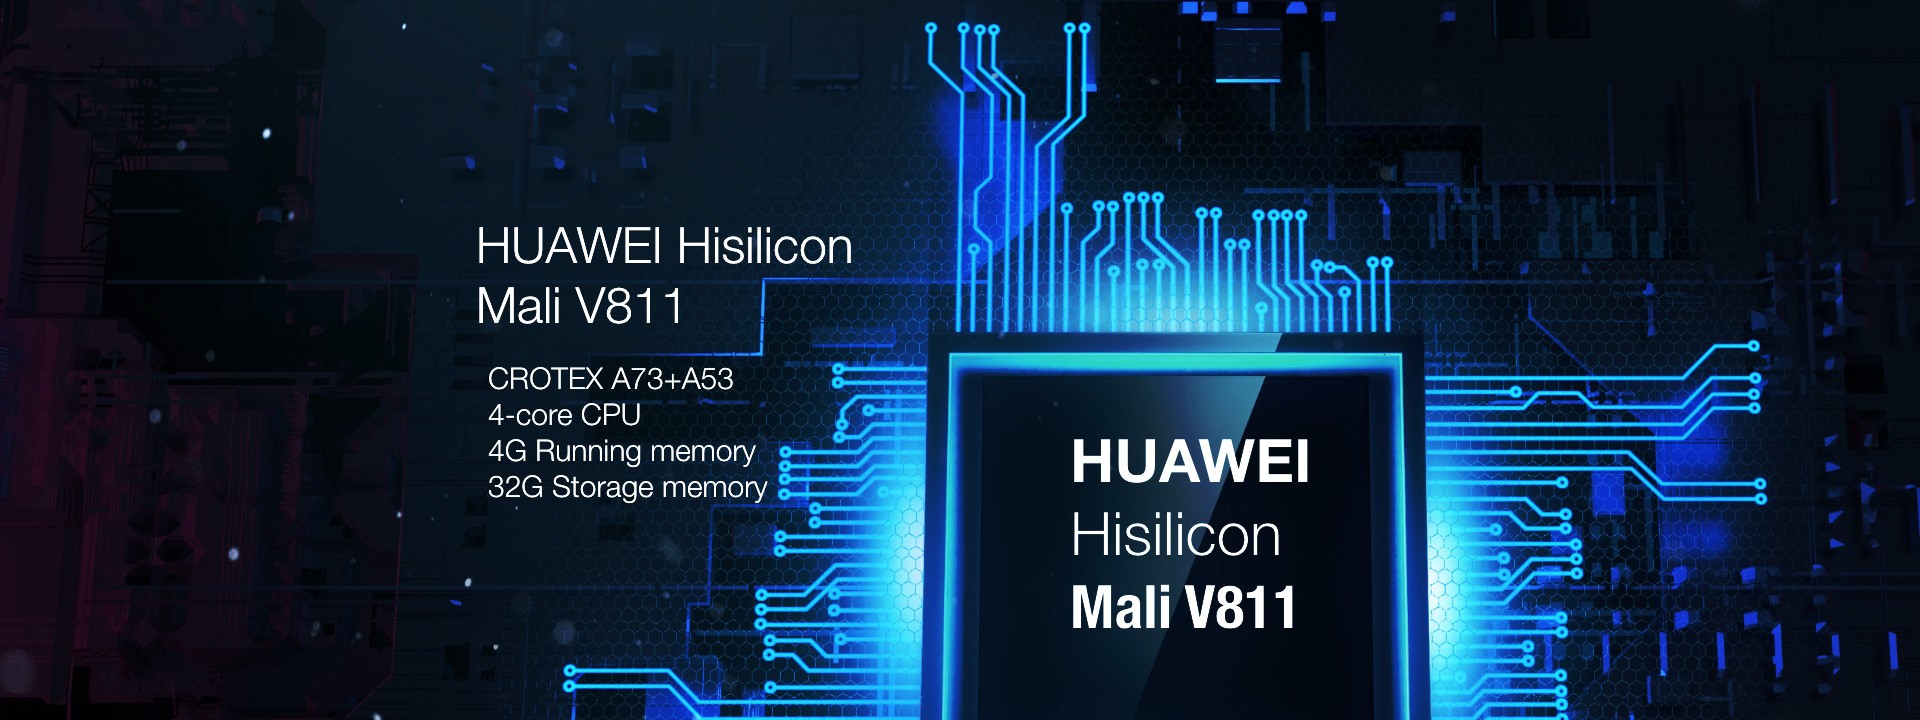 LED wall displays equipped with HUAWEI V811 chip